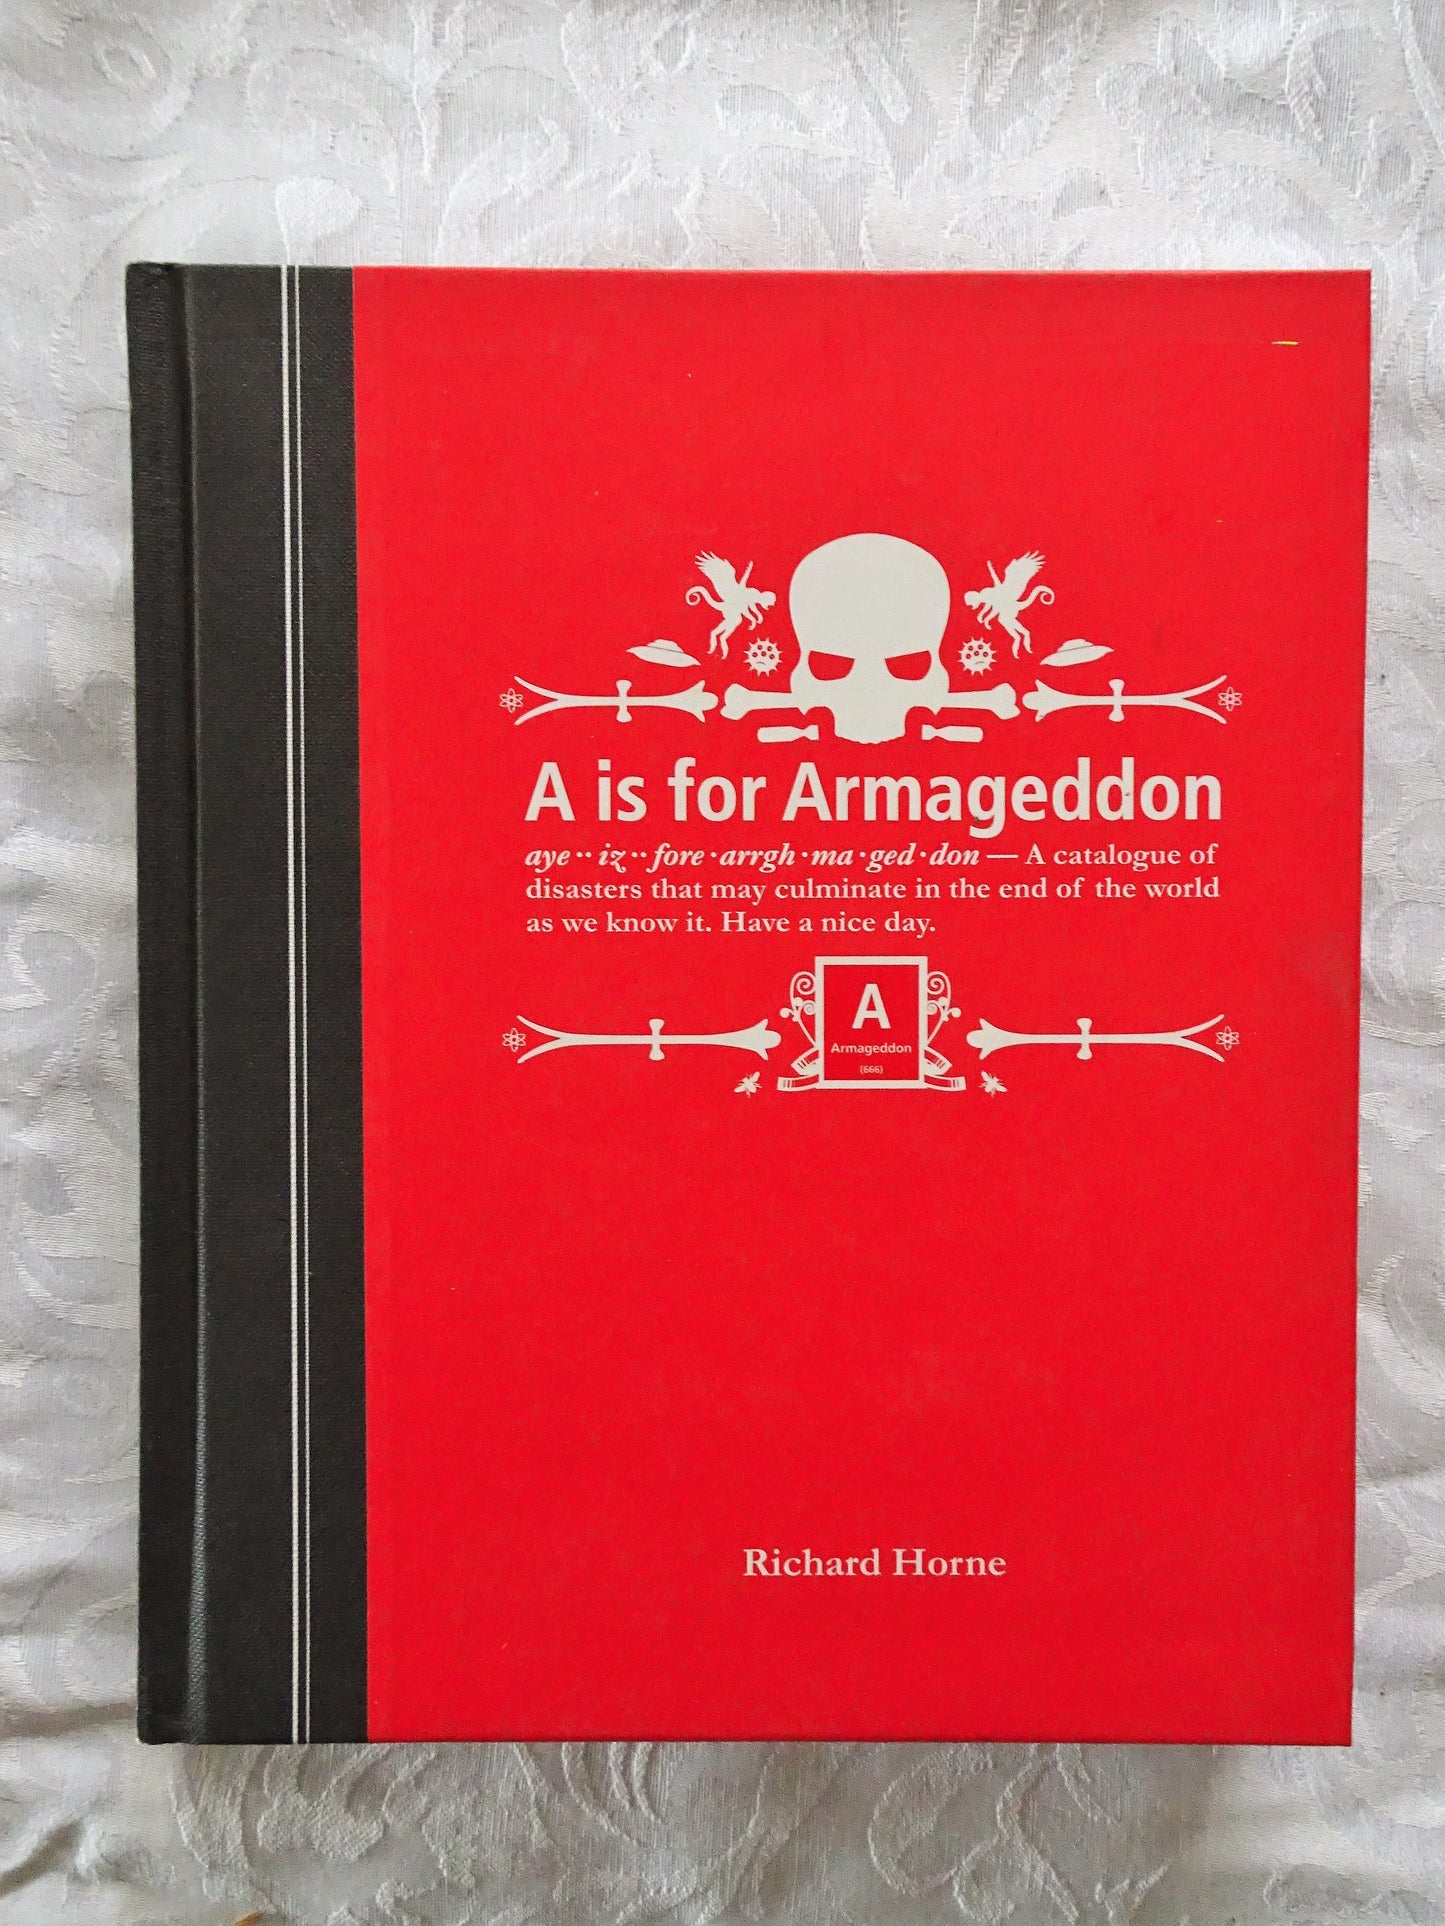 A is for Armageddon by Richard Horne